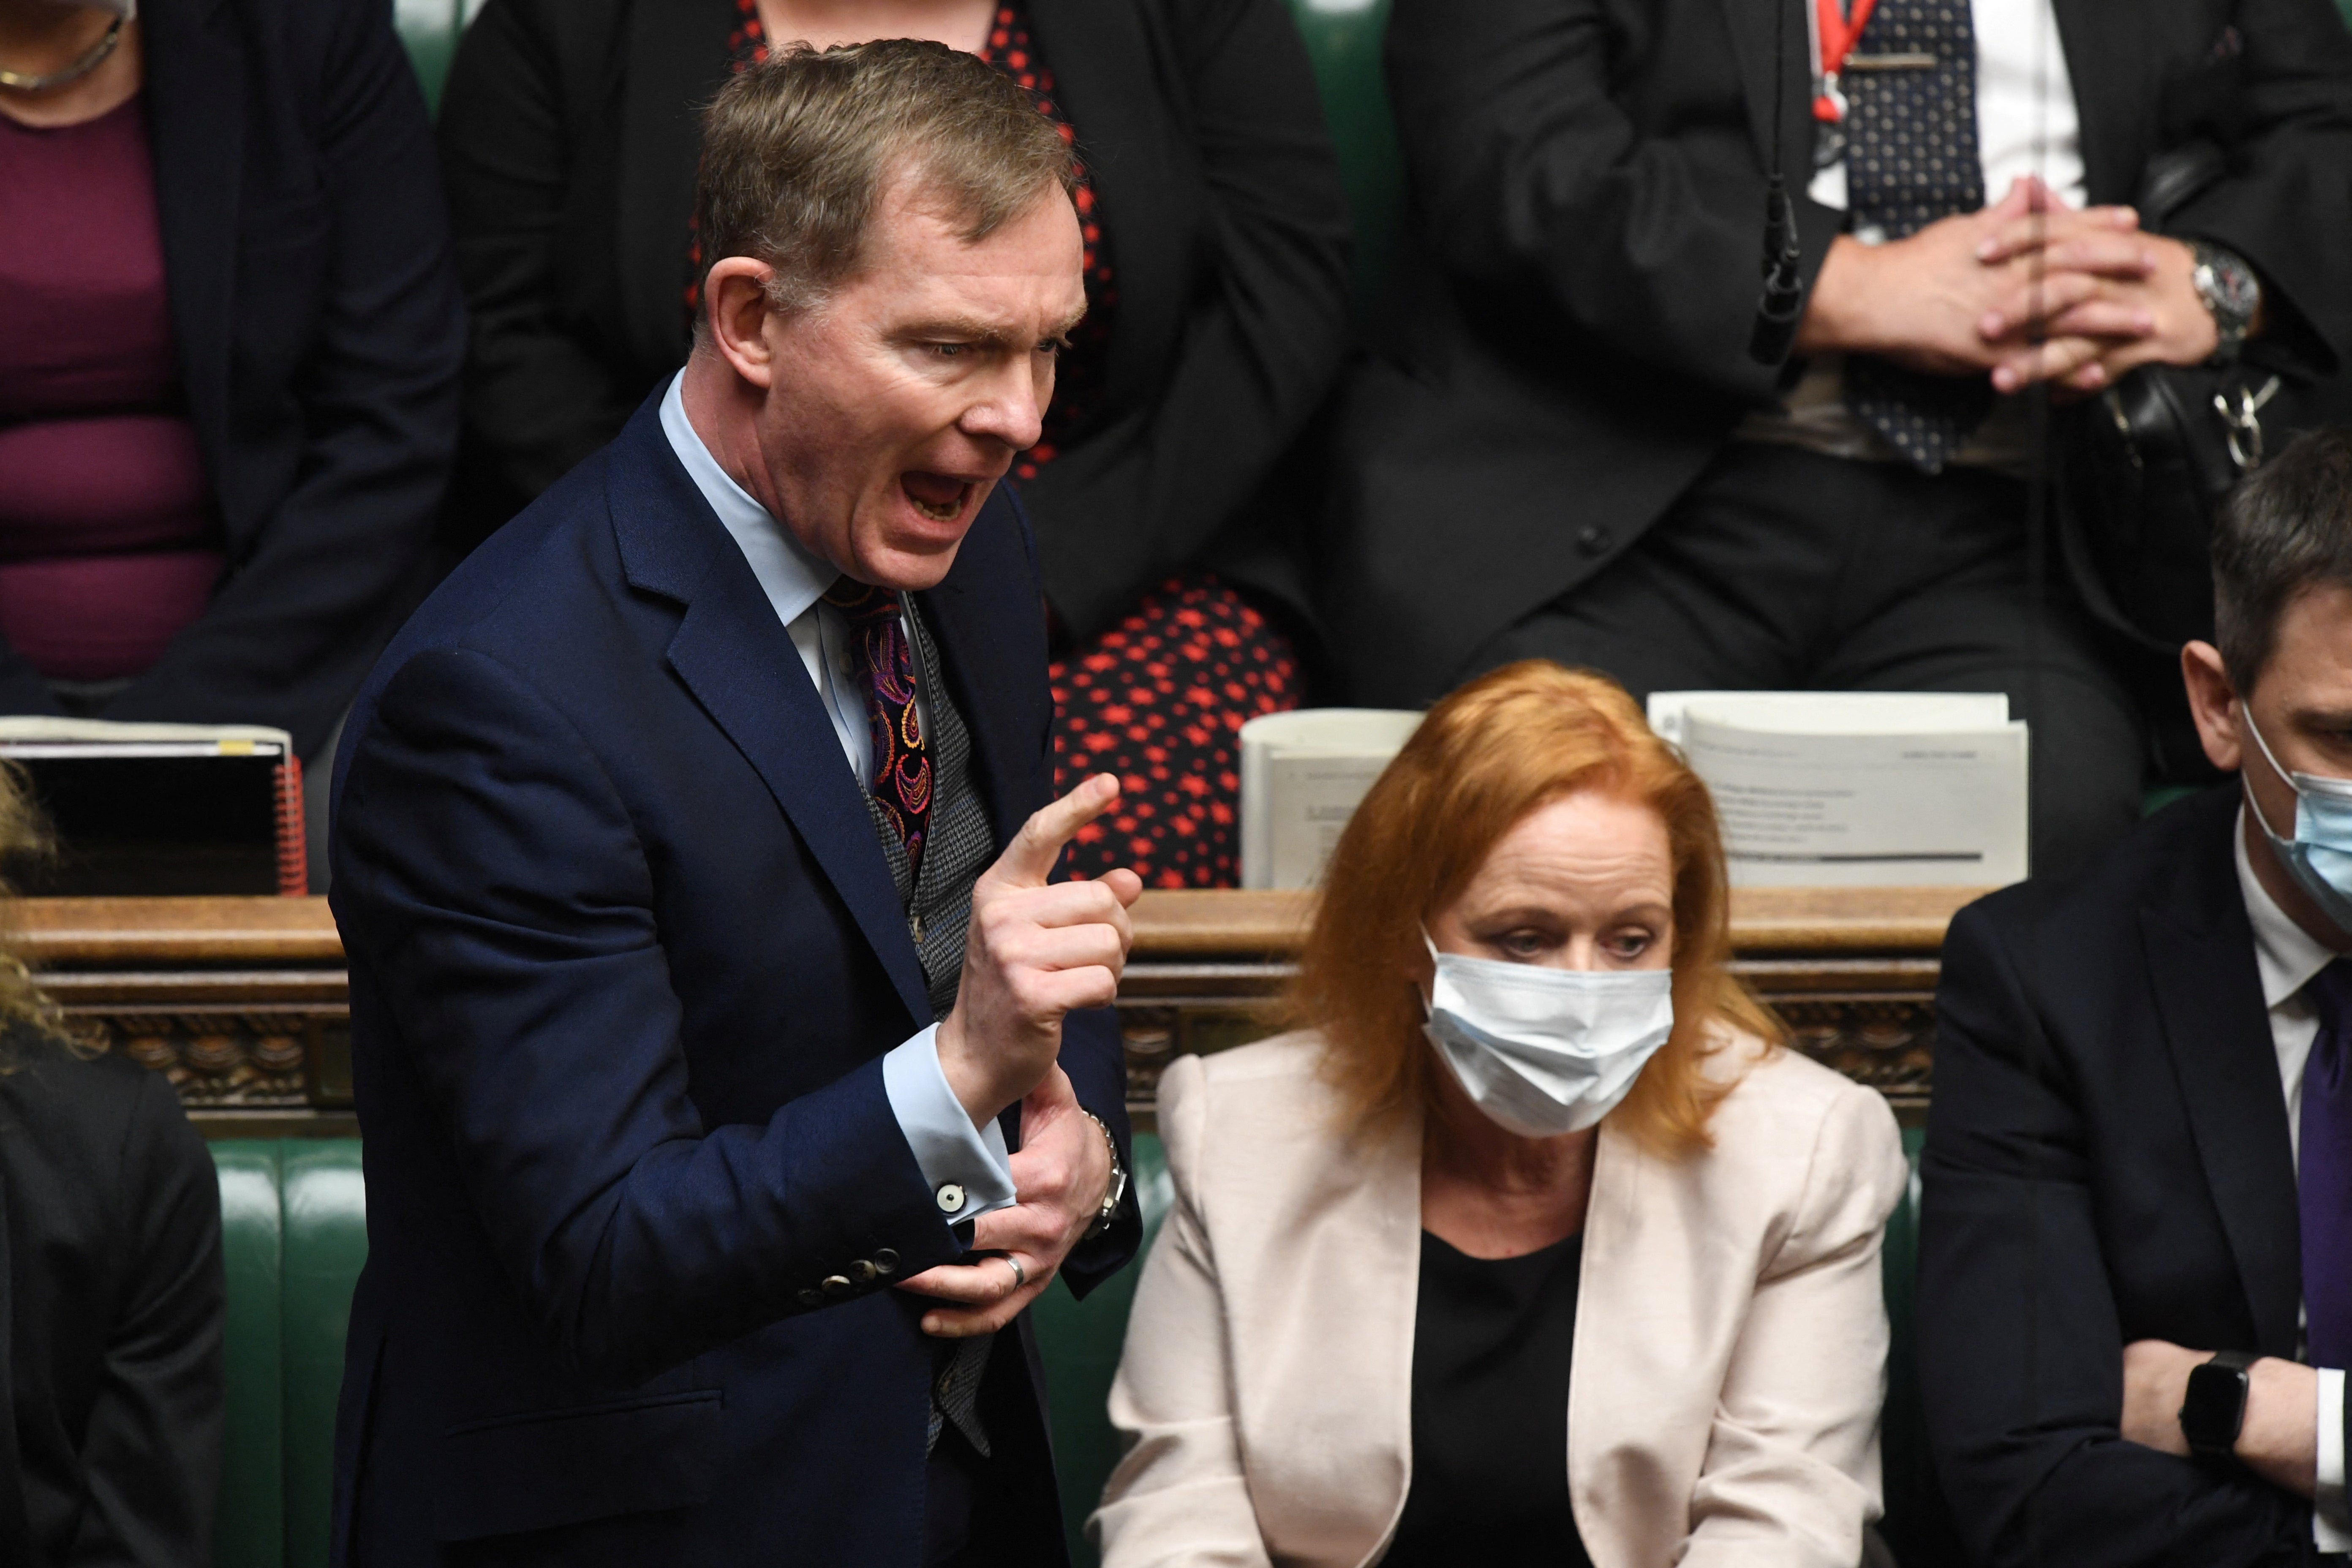 Chris Bryant said MPs’ ‘blackmail’ allegations should be probed by the police